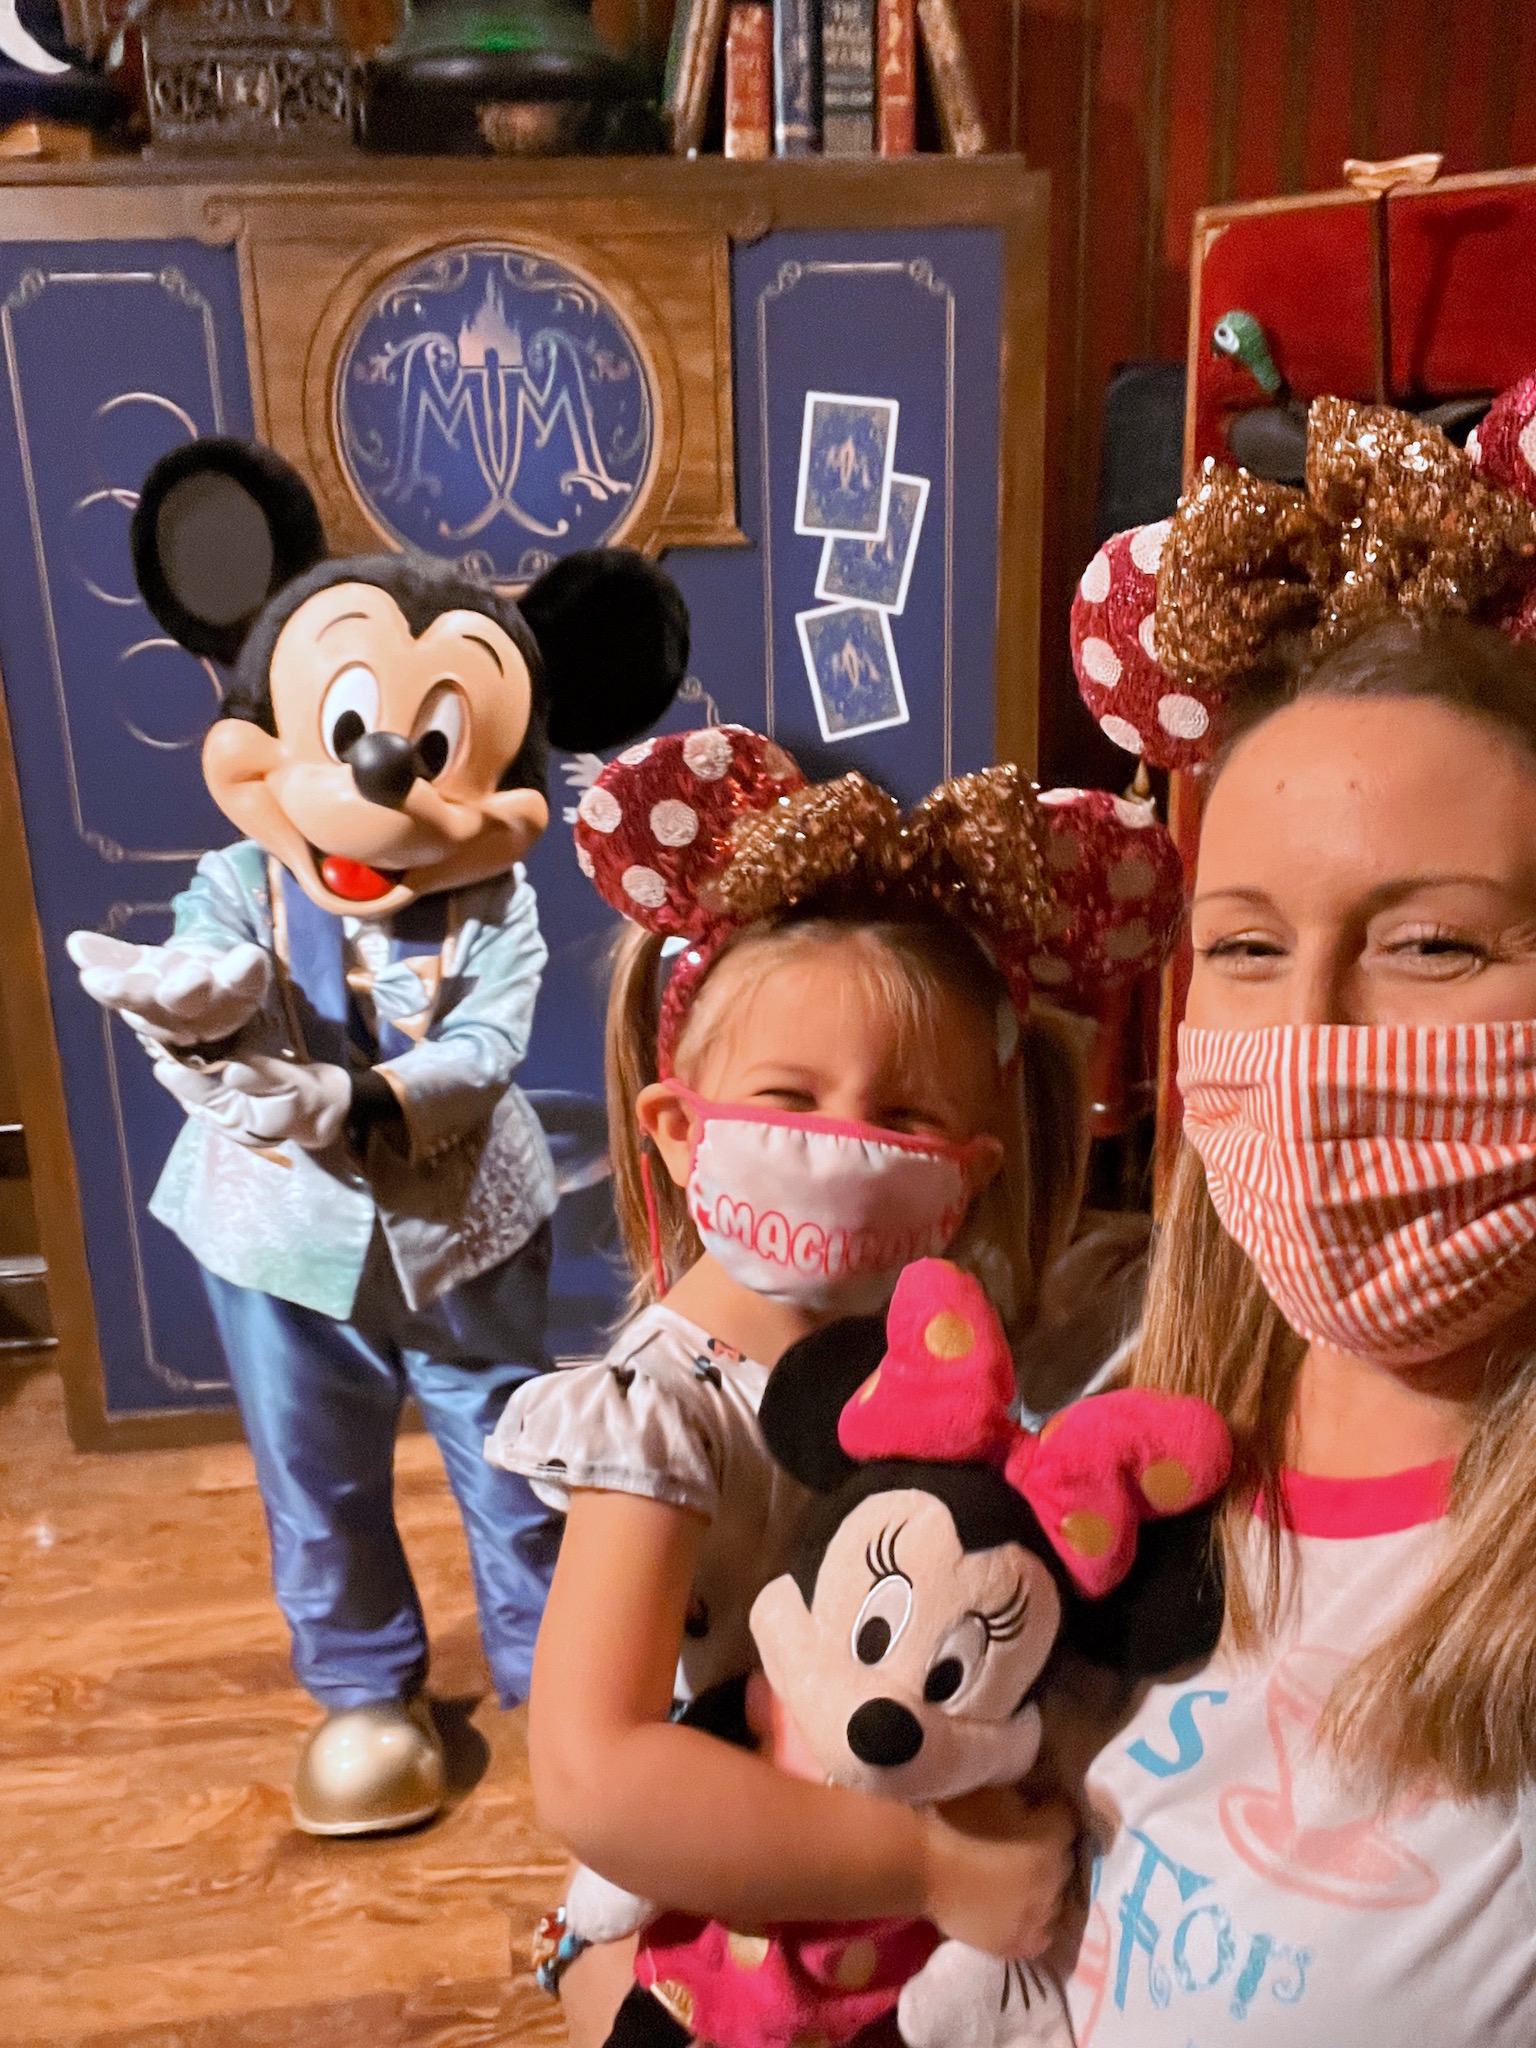 Pepper meets Mickey at Epcot! Part of why we chose the Mickey and Minnie Mouse theme for her 3rd birthday party!